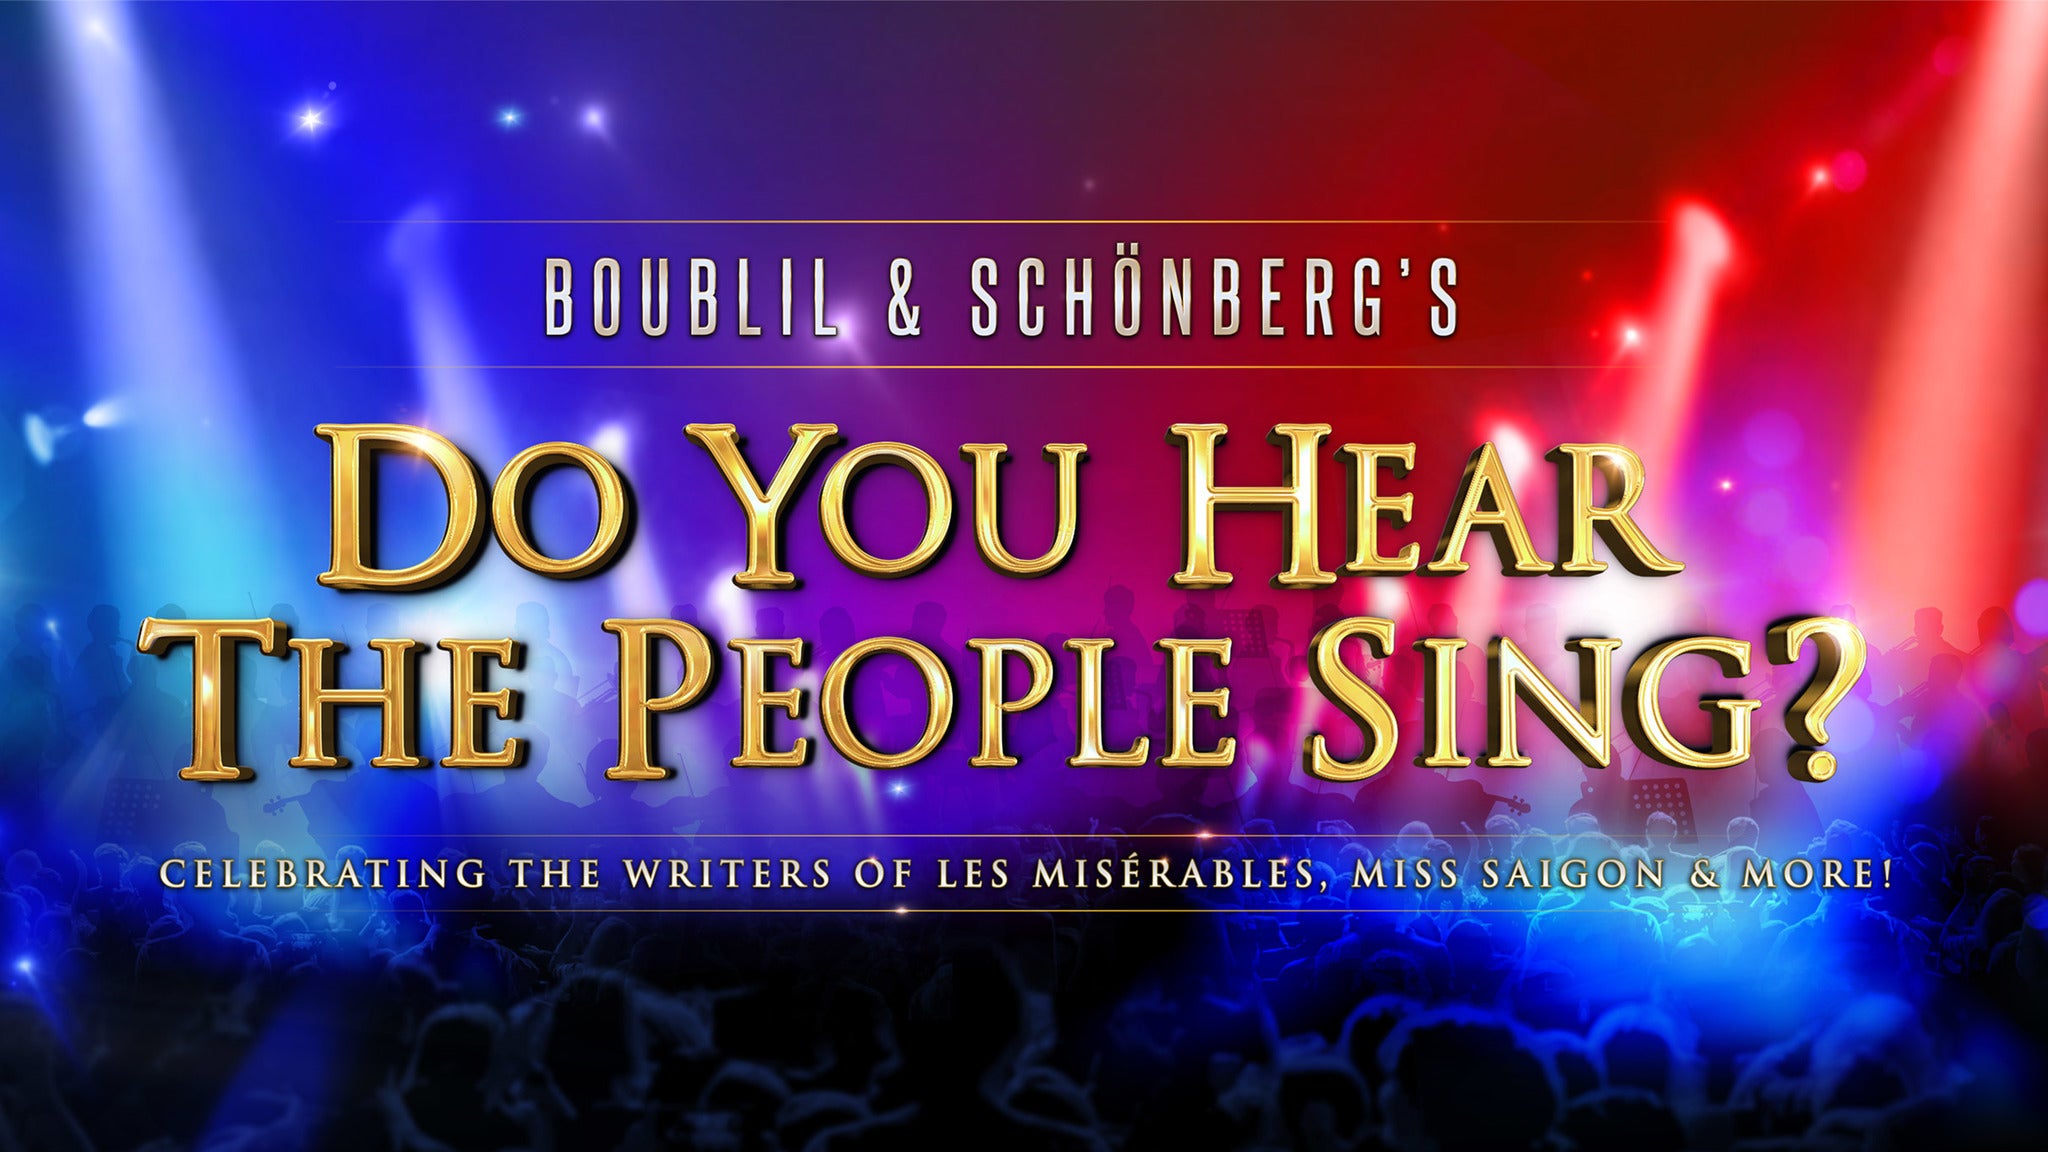 Do You Hear The People Sing?